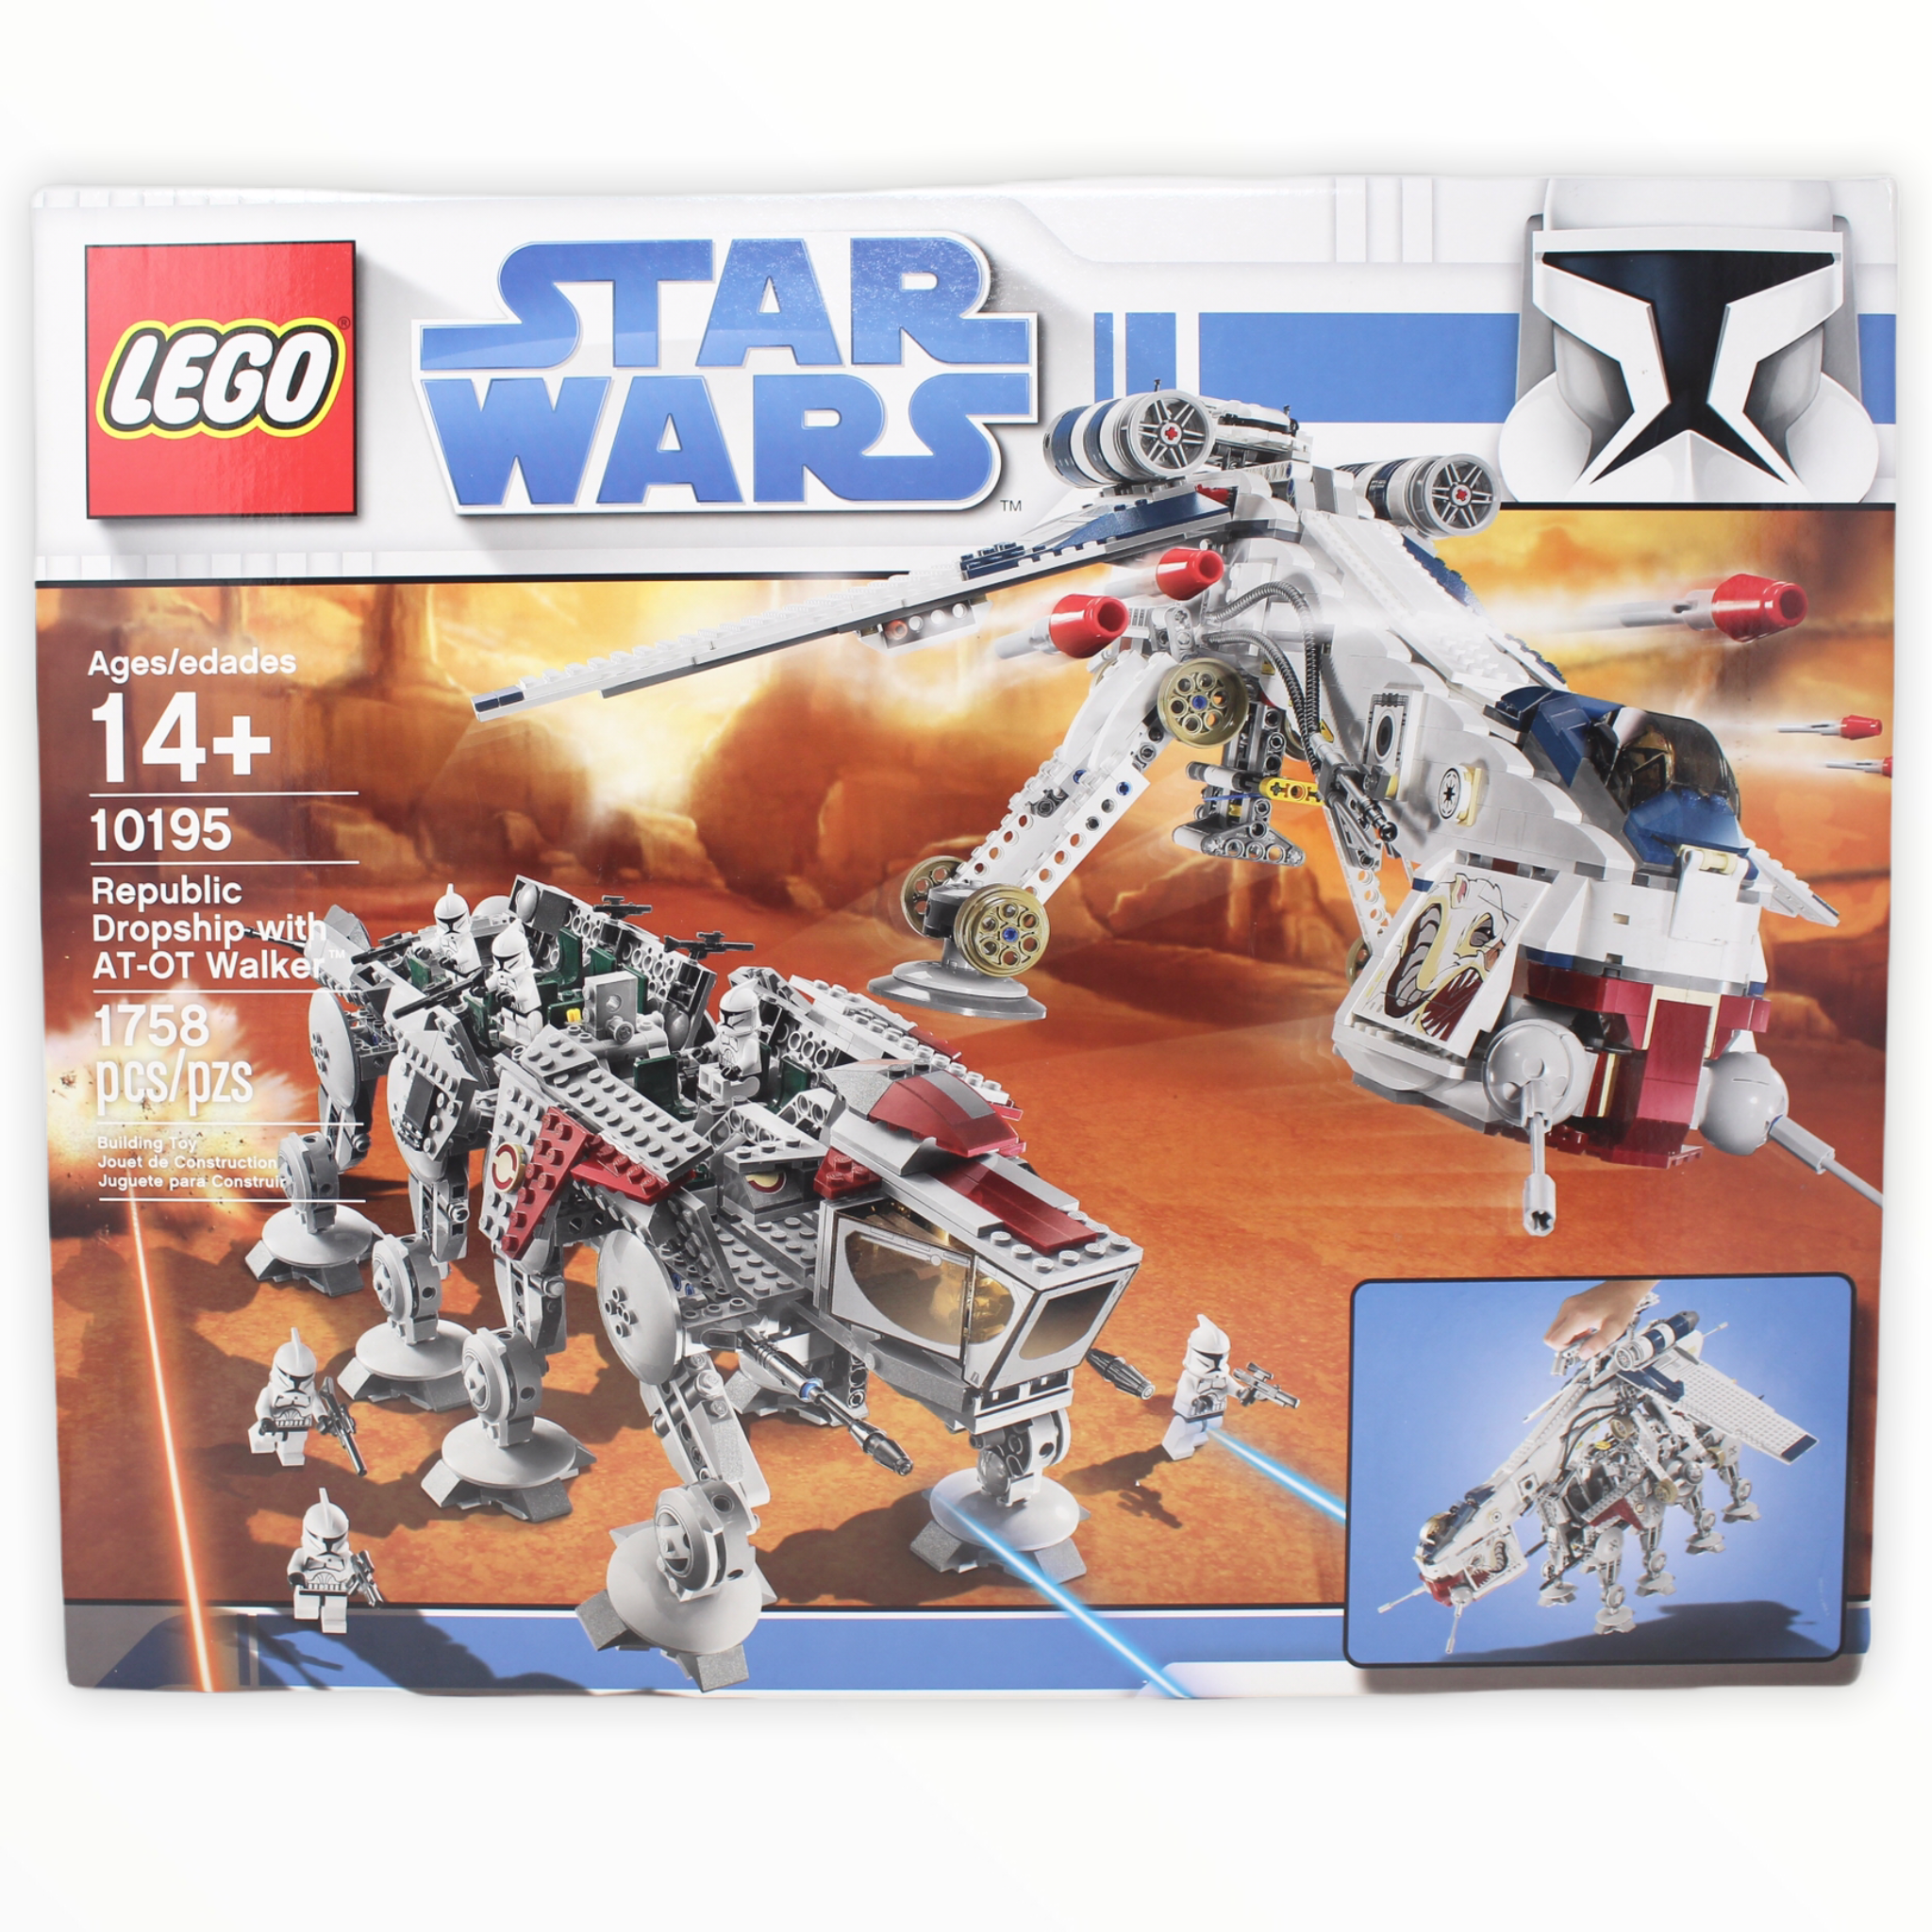 Retired Set 10195 Star Wars Republic Dropship with AT-OT